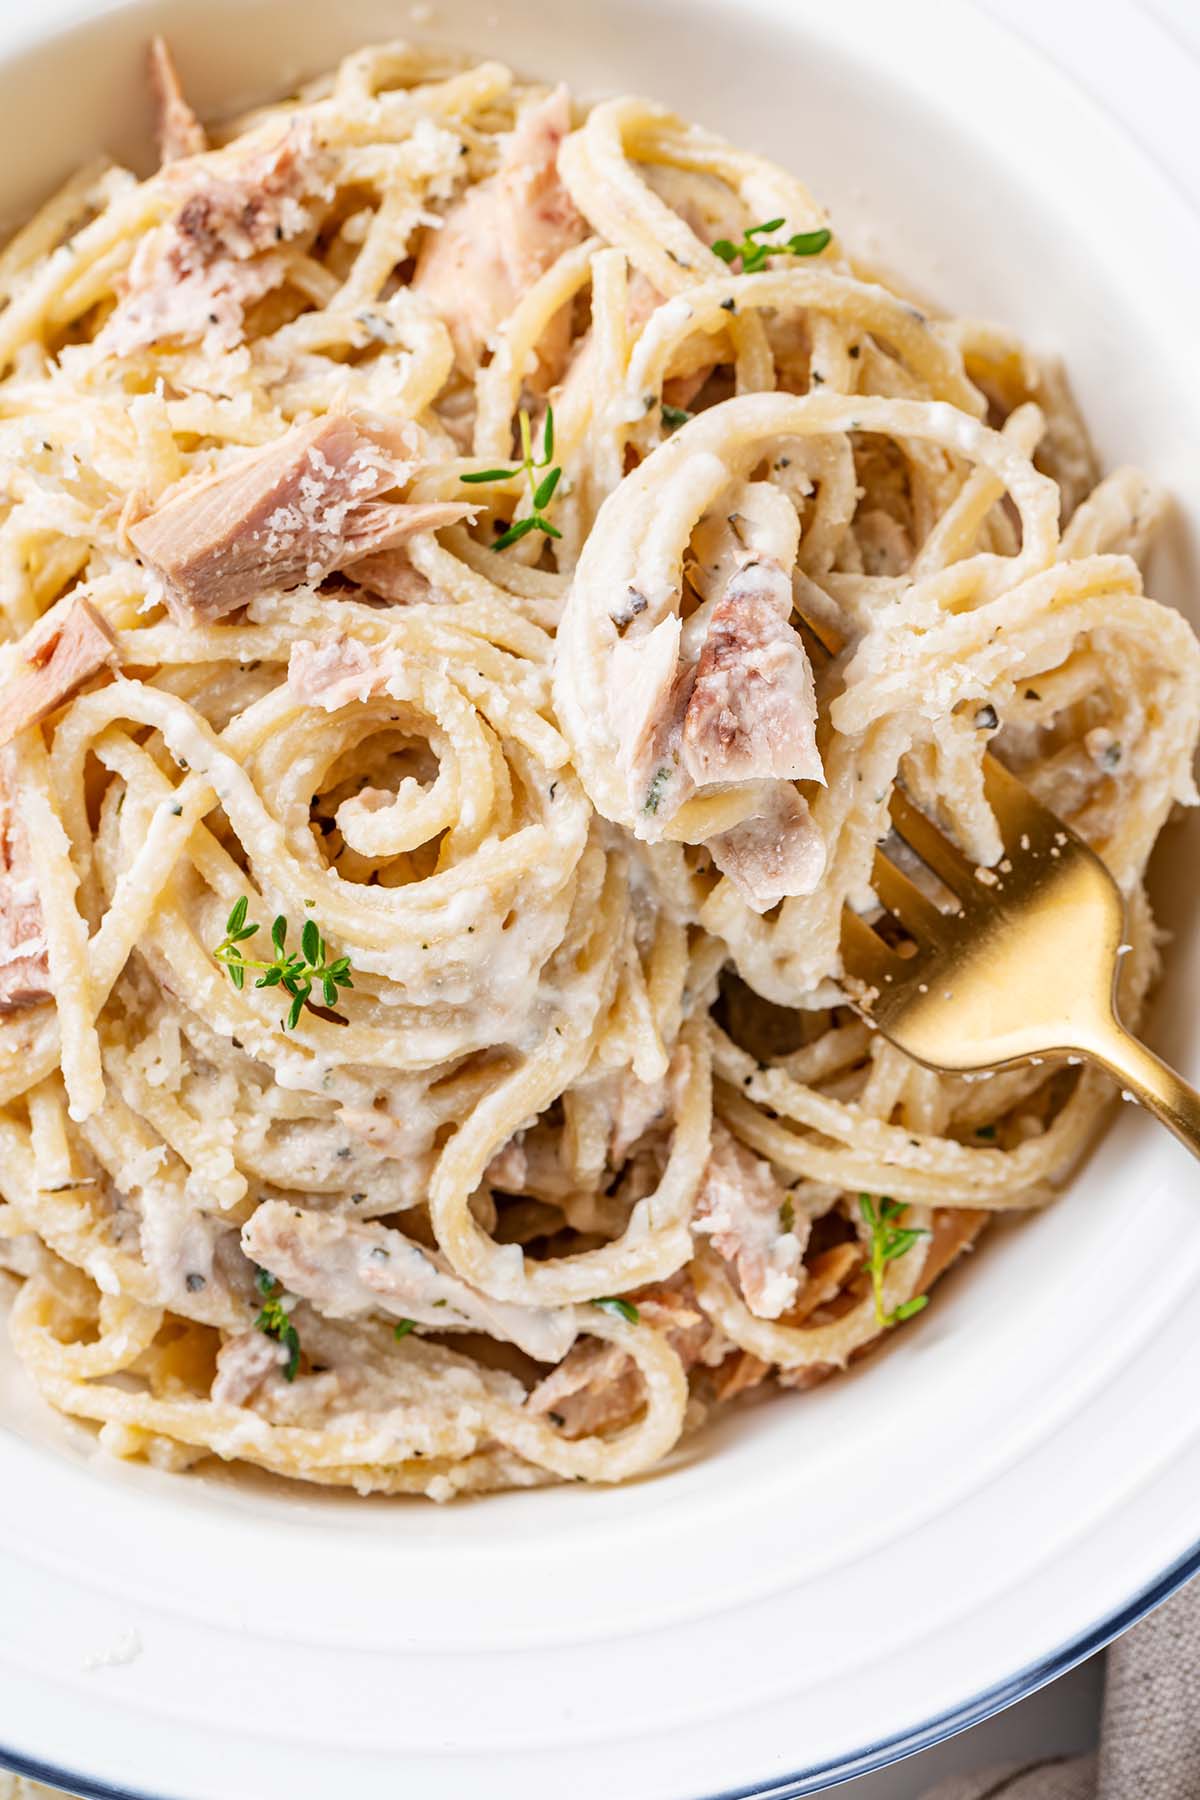 A plate of creamy canned tuna pasta, garnished with grated Parmesan cheese, with a fork holding a delicious bite of the pasta dish